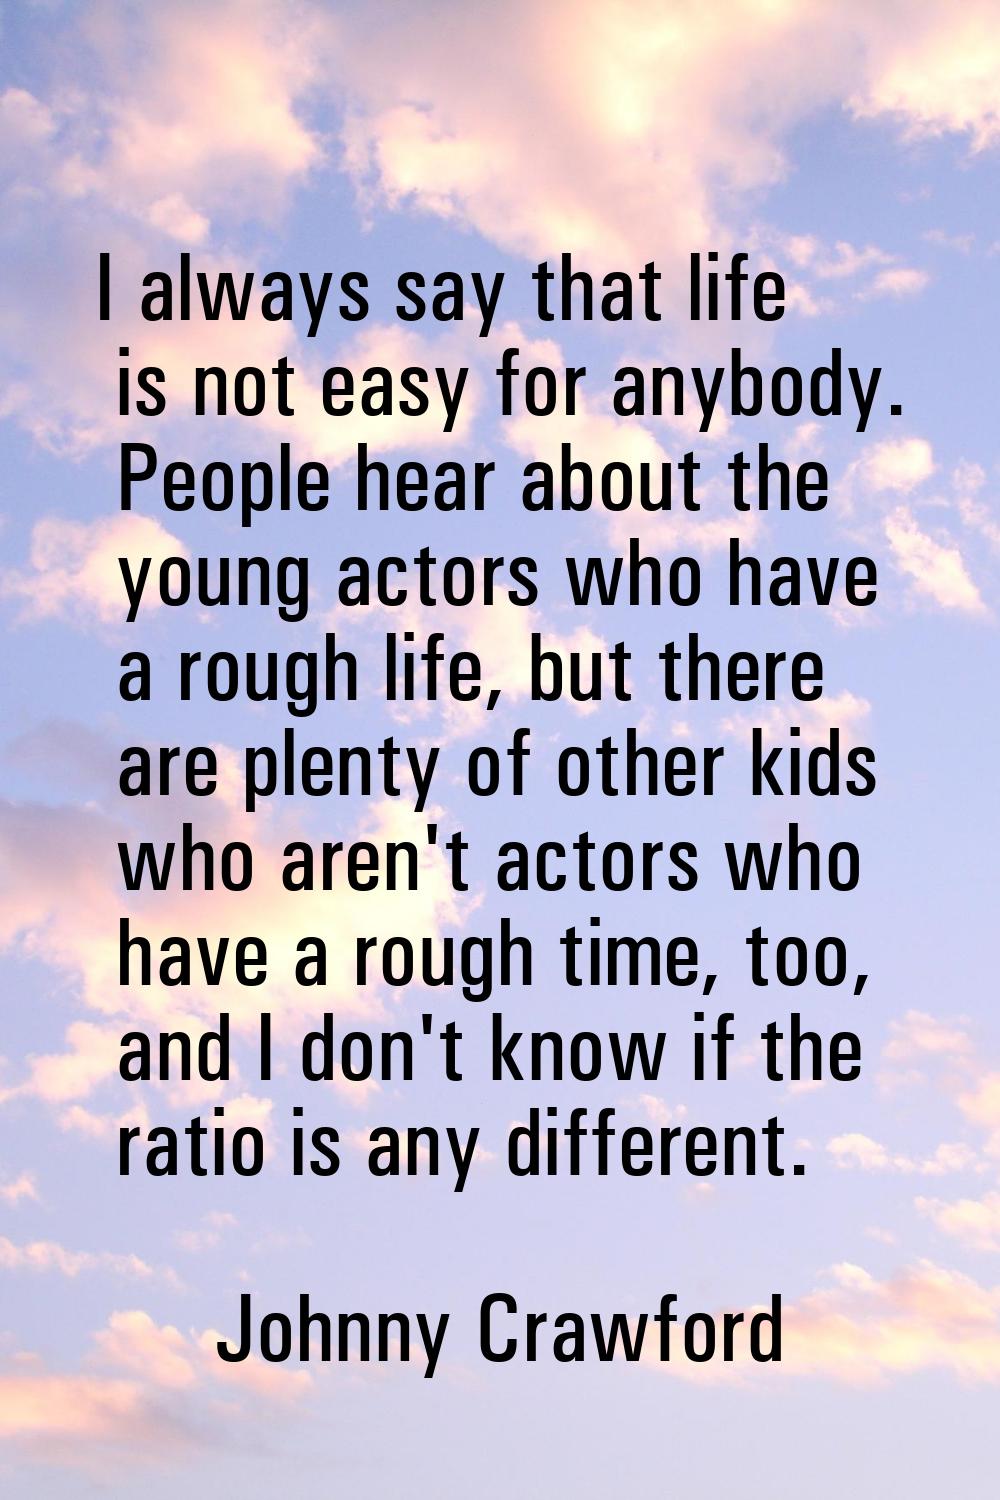 I always say that life is not easy for anybody. People hear about the young actors who have a rough